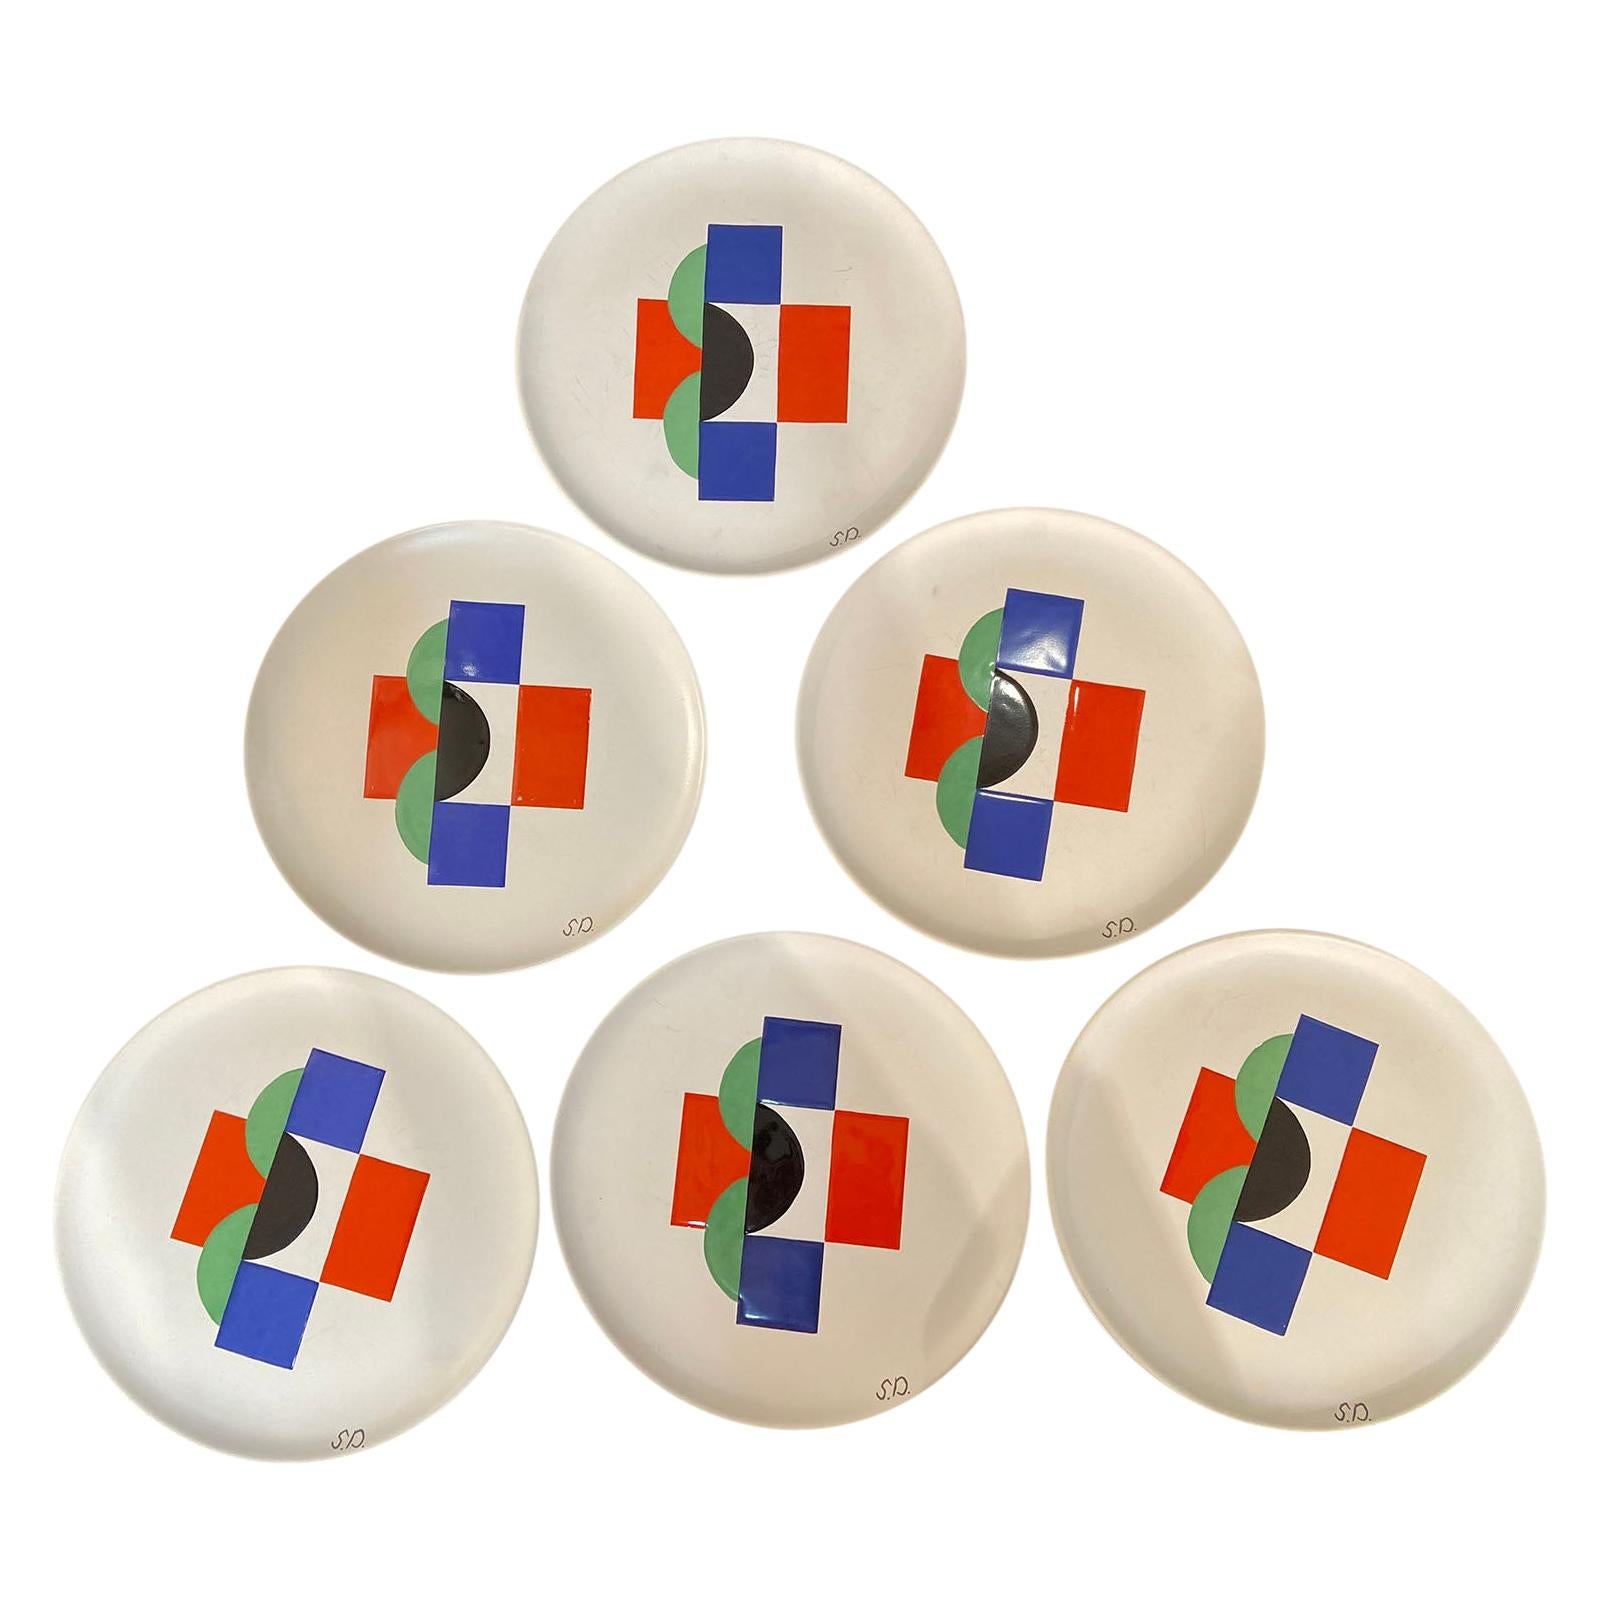 Sonia Delaunay, Set of 6 Plates and 1 Large Plate, circa 1985